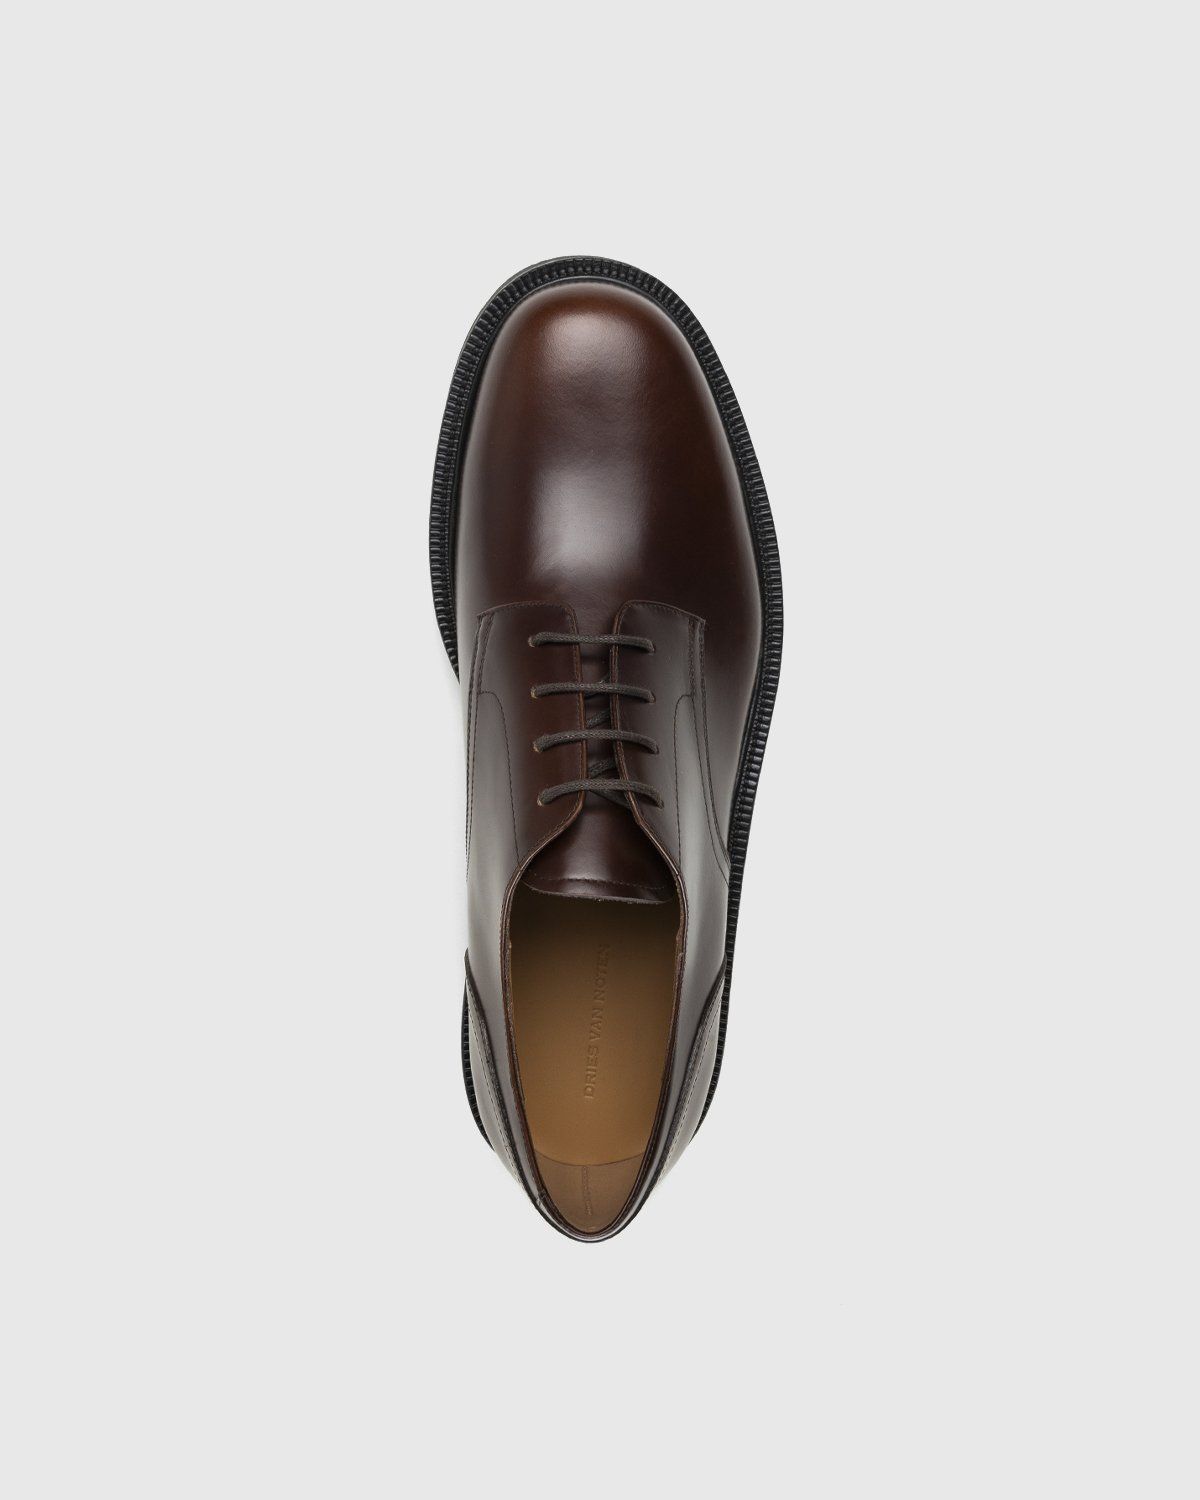 Dries van Noten – Leather Lace-Up Derby Shoes Brown - Shoes - Brown - Image 5